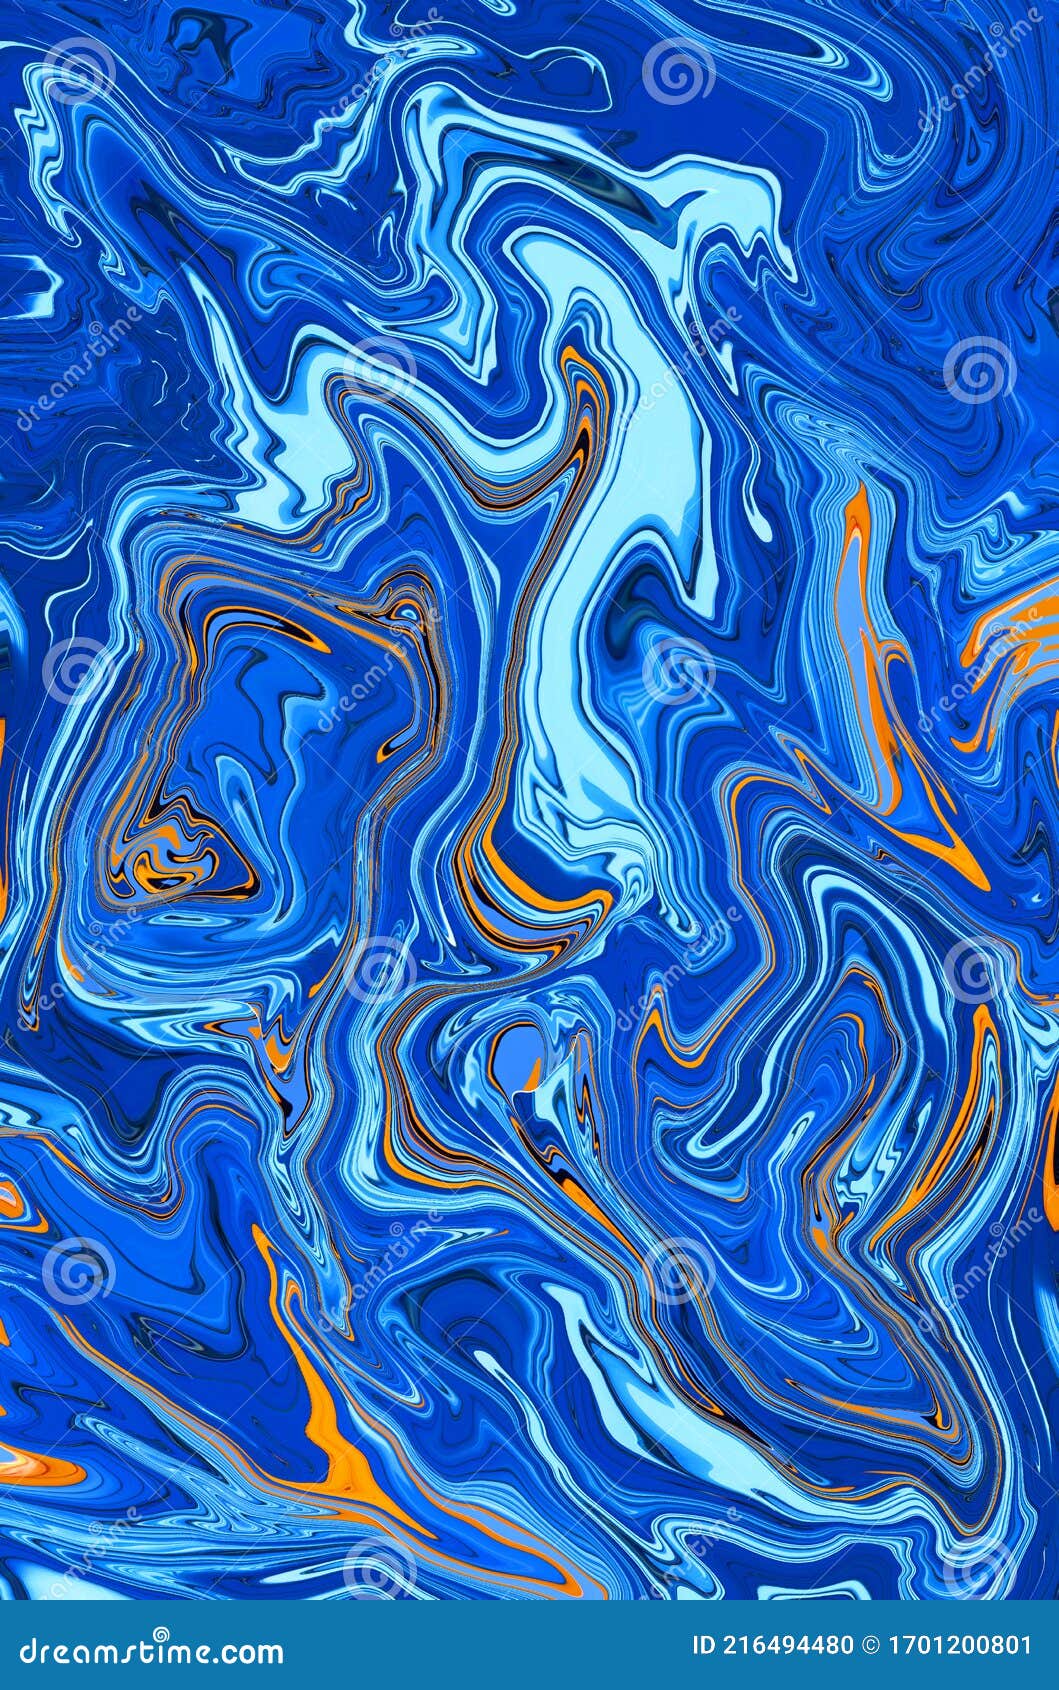 Abstract Bright Fluid Blue and Orange Background. Art Trippy ...